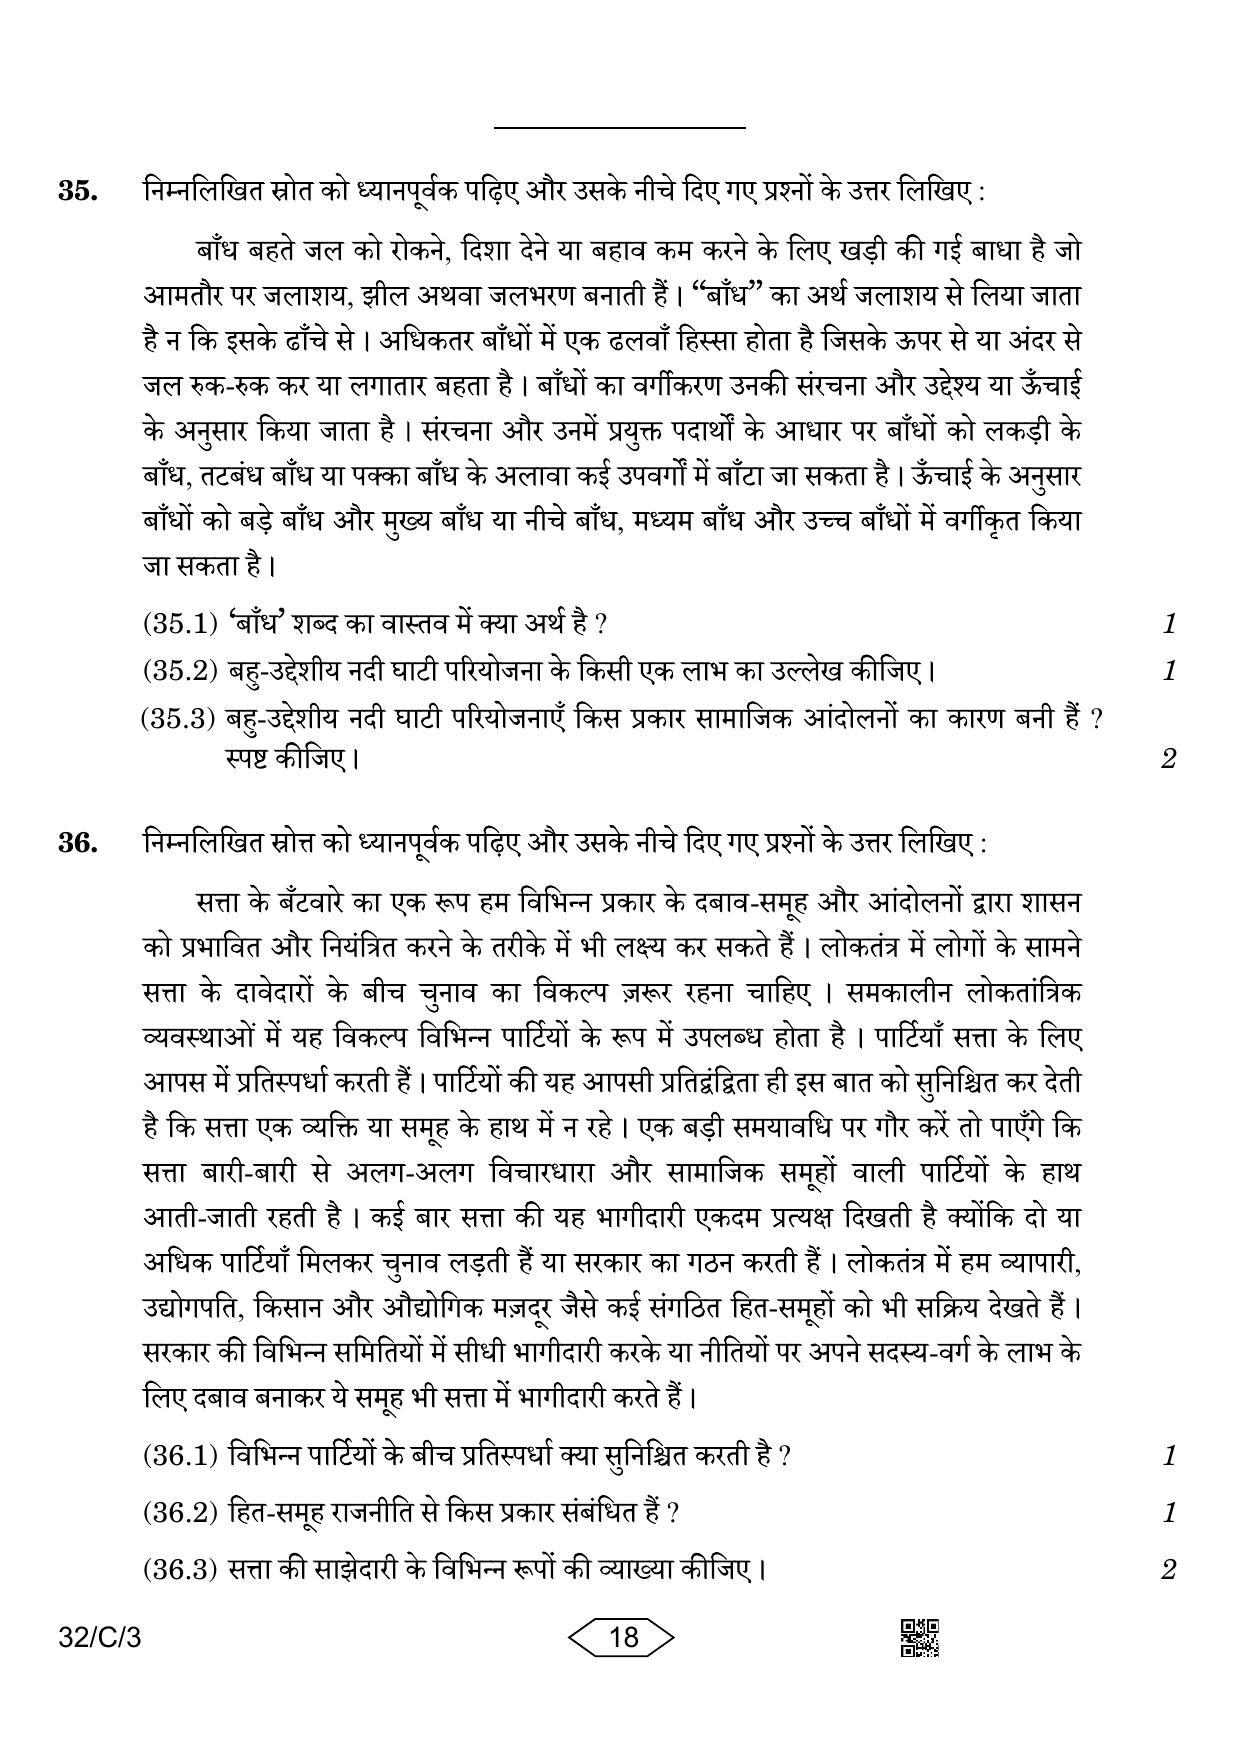 CBSE Class 10 32-3 Social Science 2023 (Compartment) Question Paper - Page 18